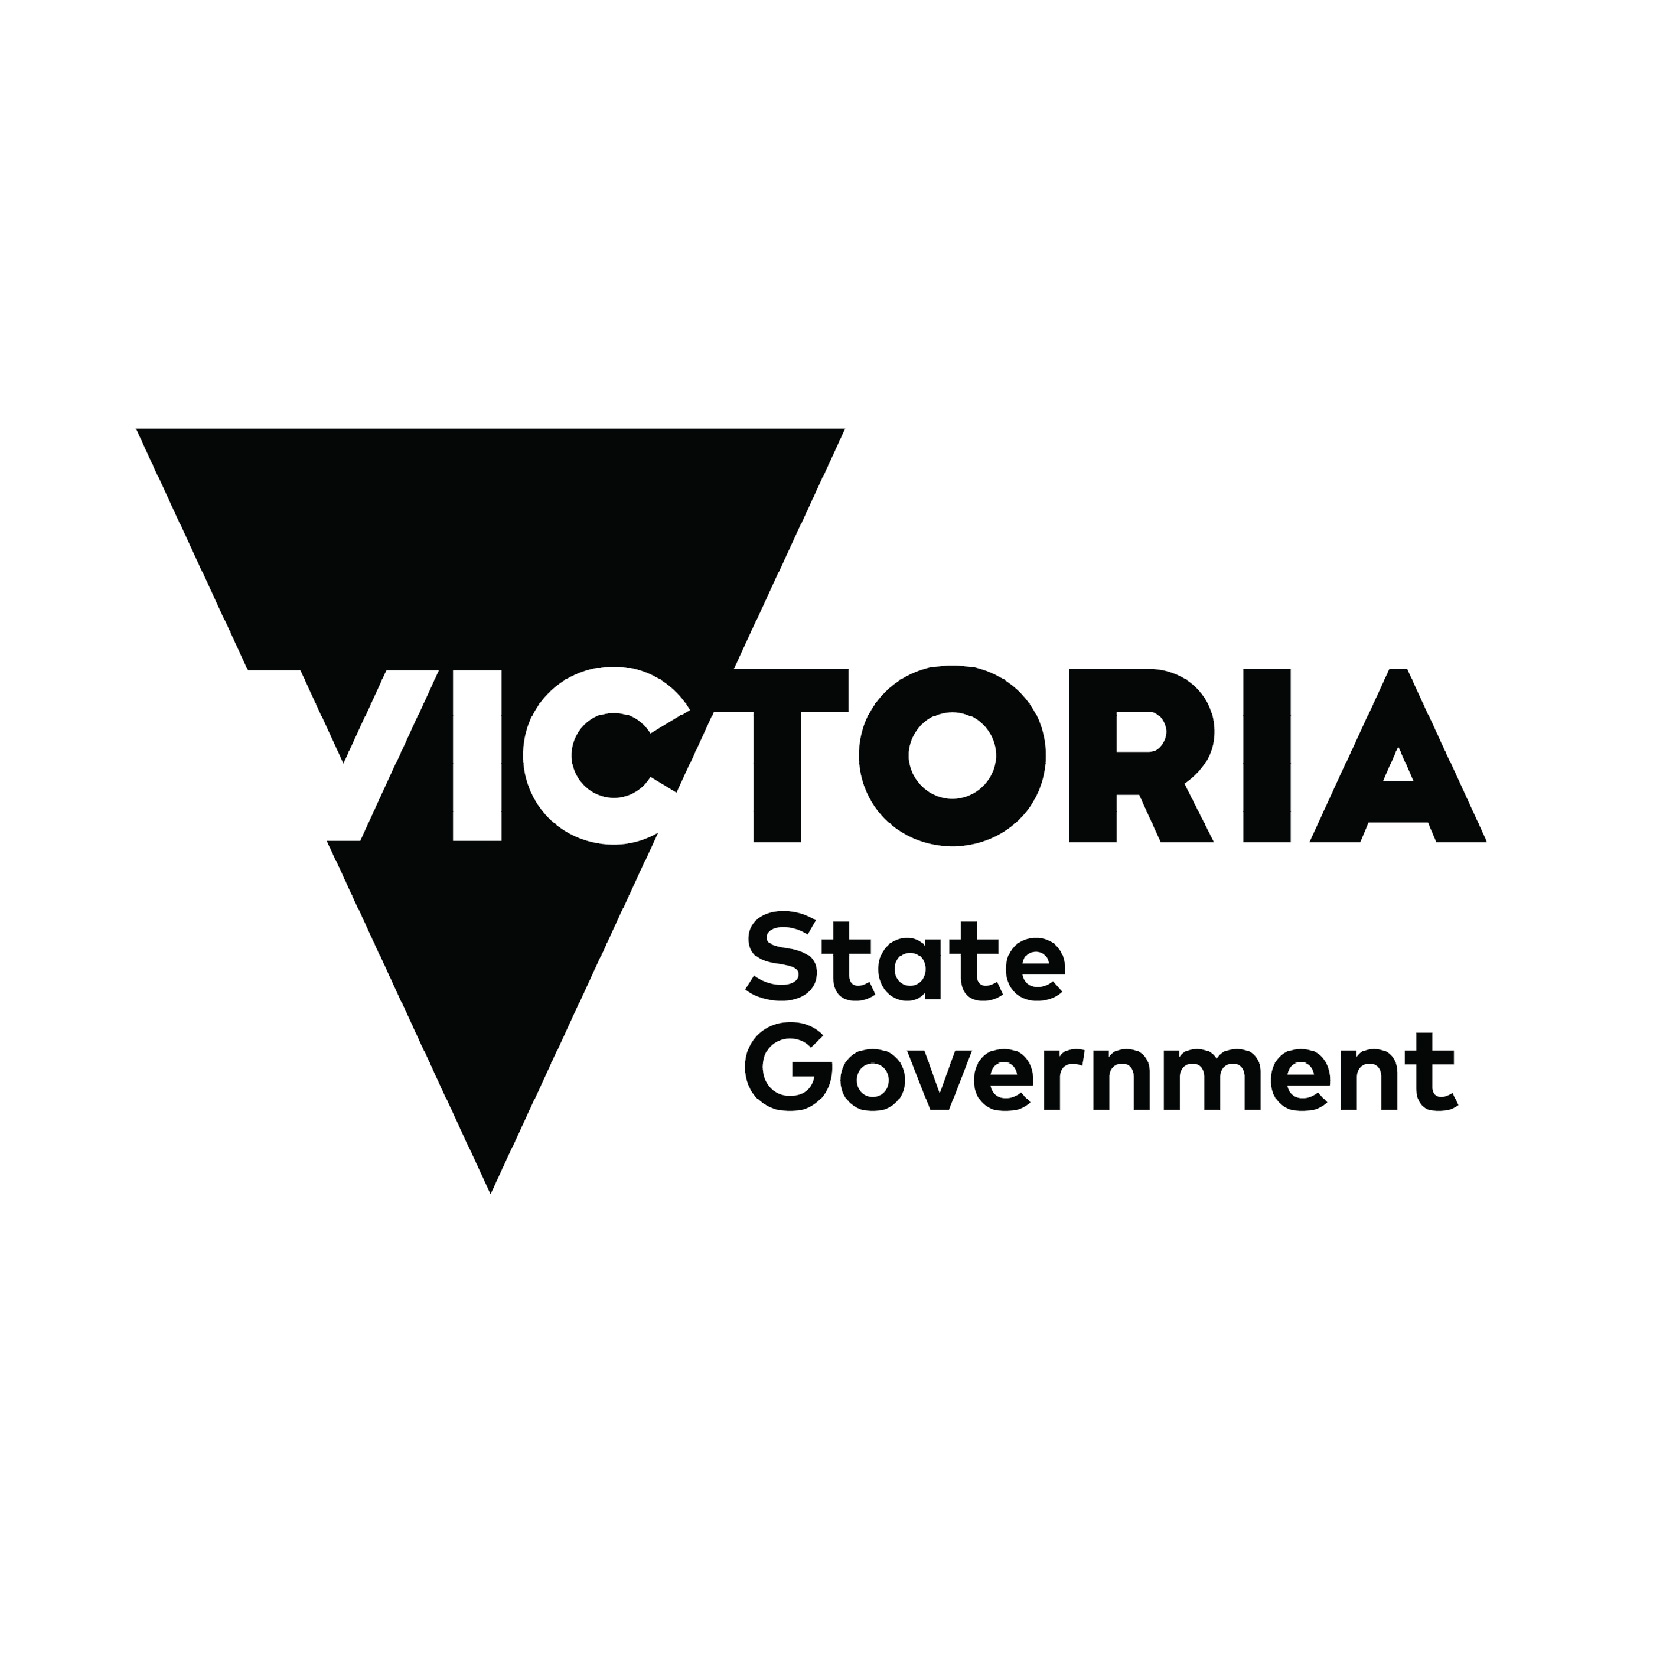 Our clients include household Australian names such as Victoria State Government.